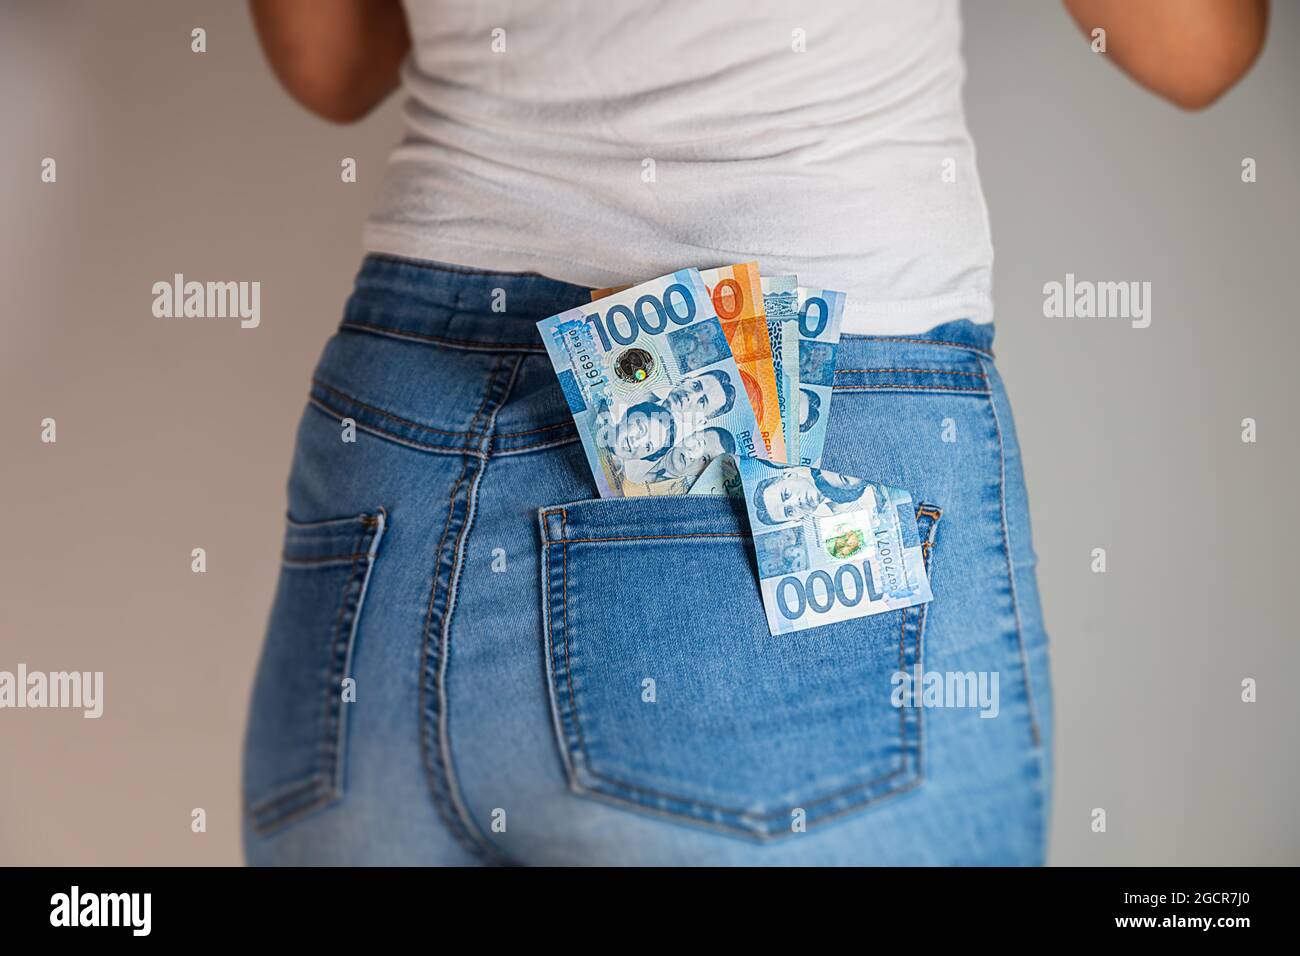 Philippines Peso in a female jeans pocket. Philippine pesos notes stuck in a woman jeans pocket. Pesos in a girl's denim pants buttock pocket. Money i Stock Photo